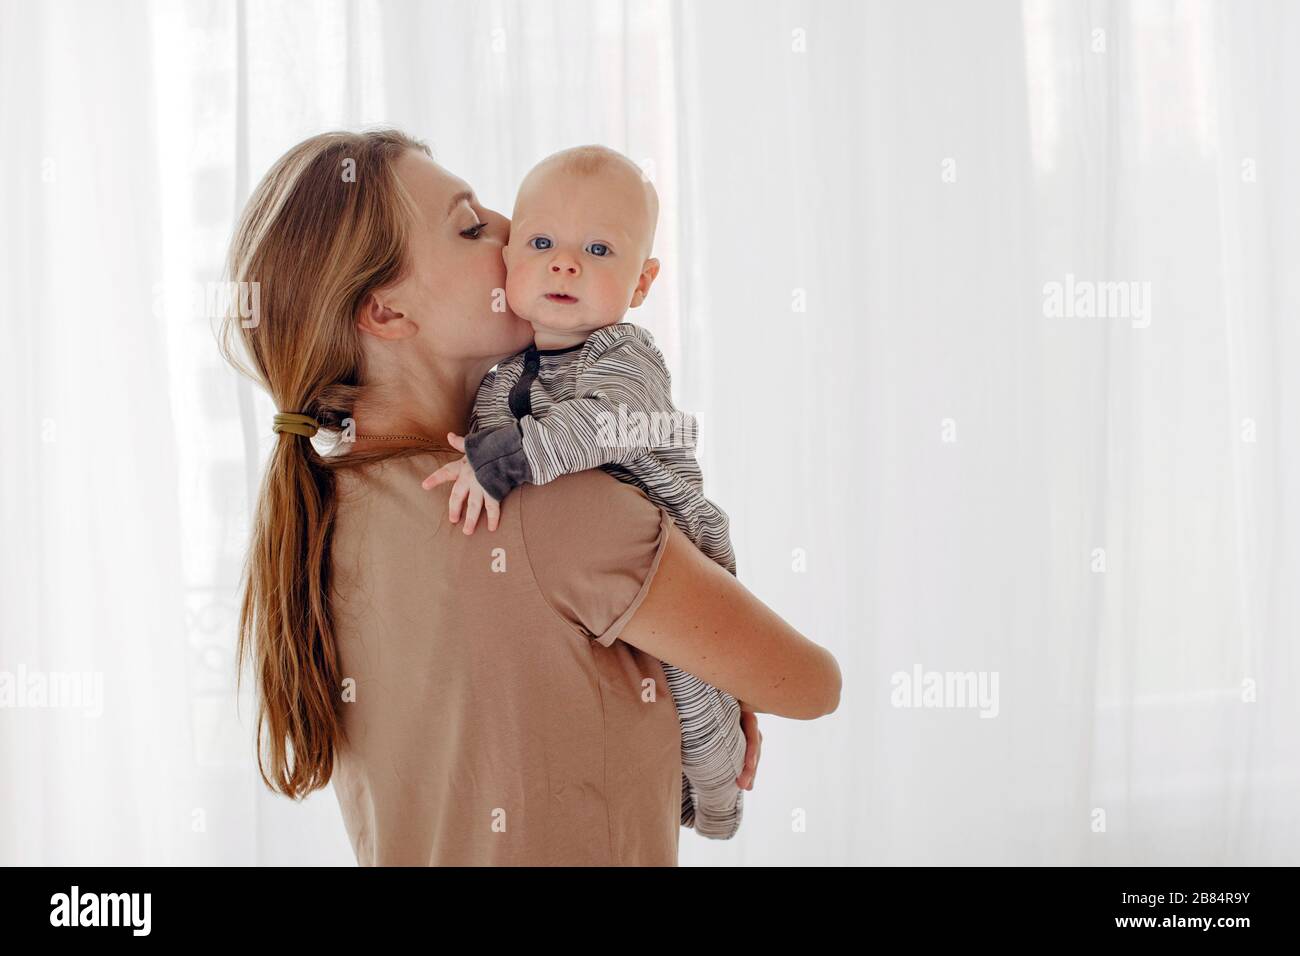 Mother kissing and hugging baby Stock Photo